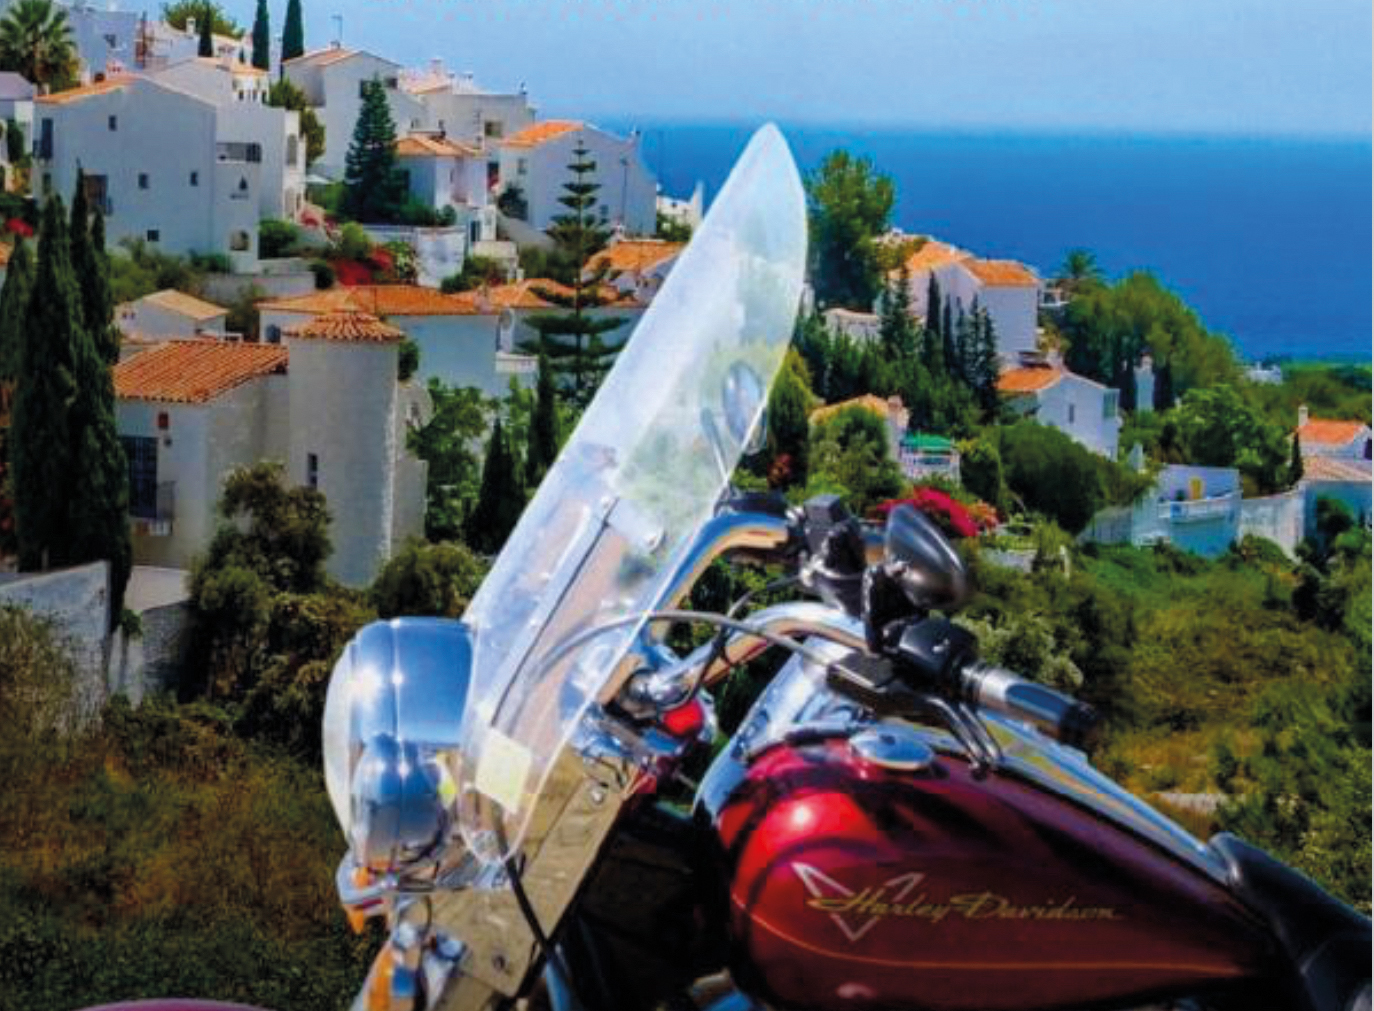 THE+FURTHEST+POINTS+%E2%80%93+MOTORCYCLE+TRAVELS+THROUGH+SPAIN+AND+PORTUGAL